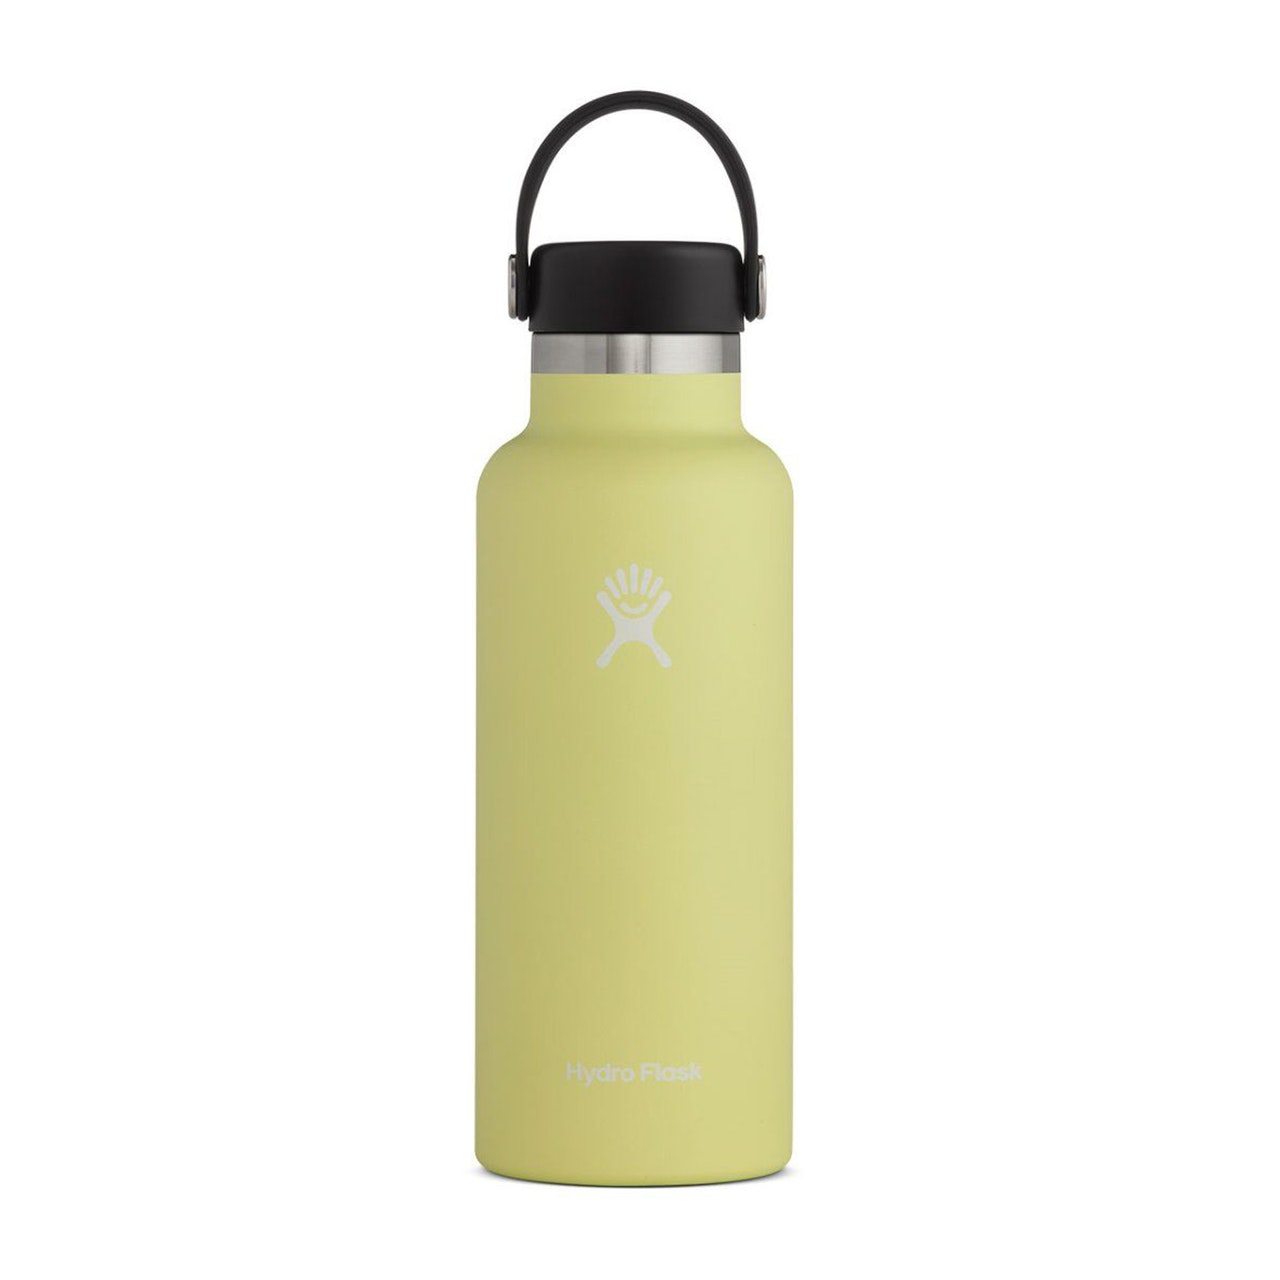 Hydro Flask 18 oz Standard Mouth With Flex Cap Water Bottle - Pineapple